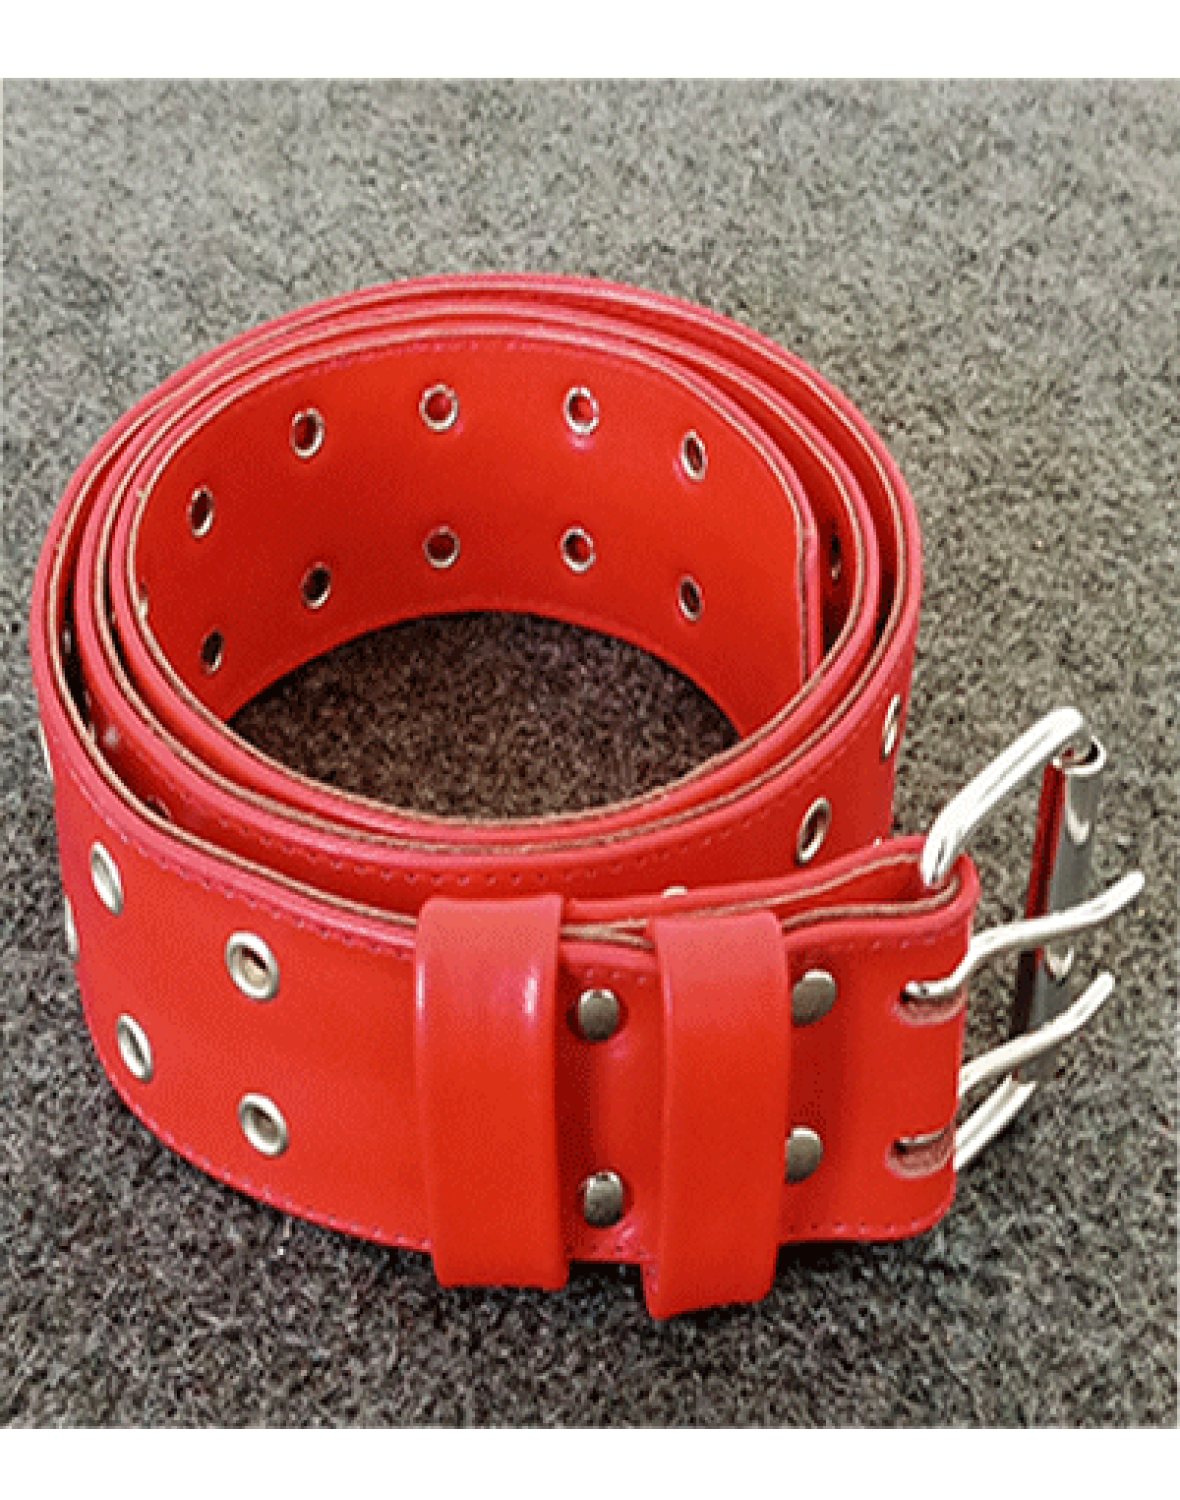 Double Prong Red Leather Kilt Belt